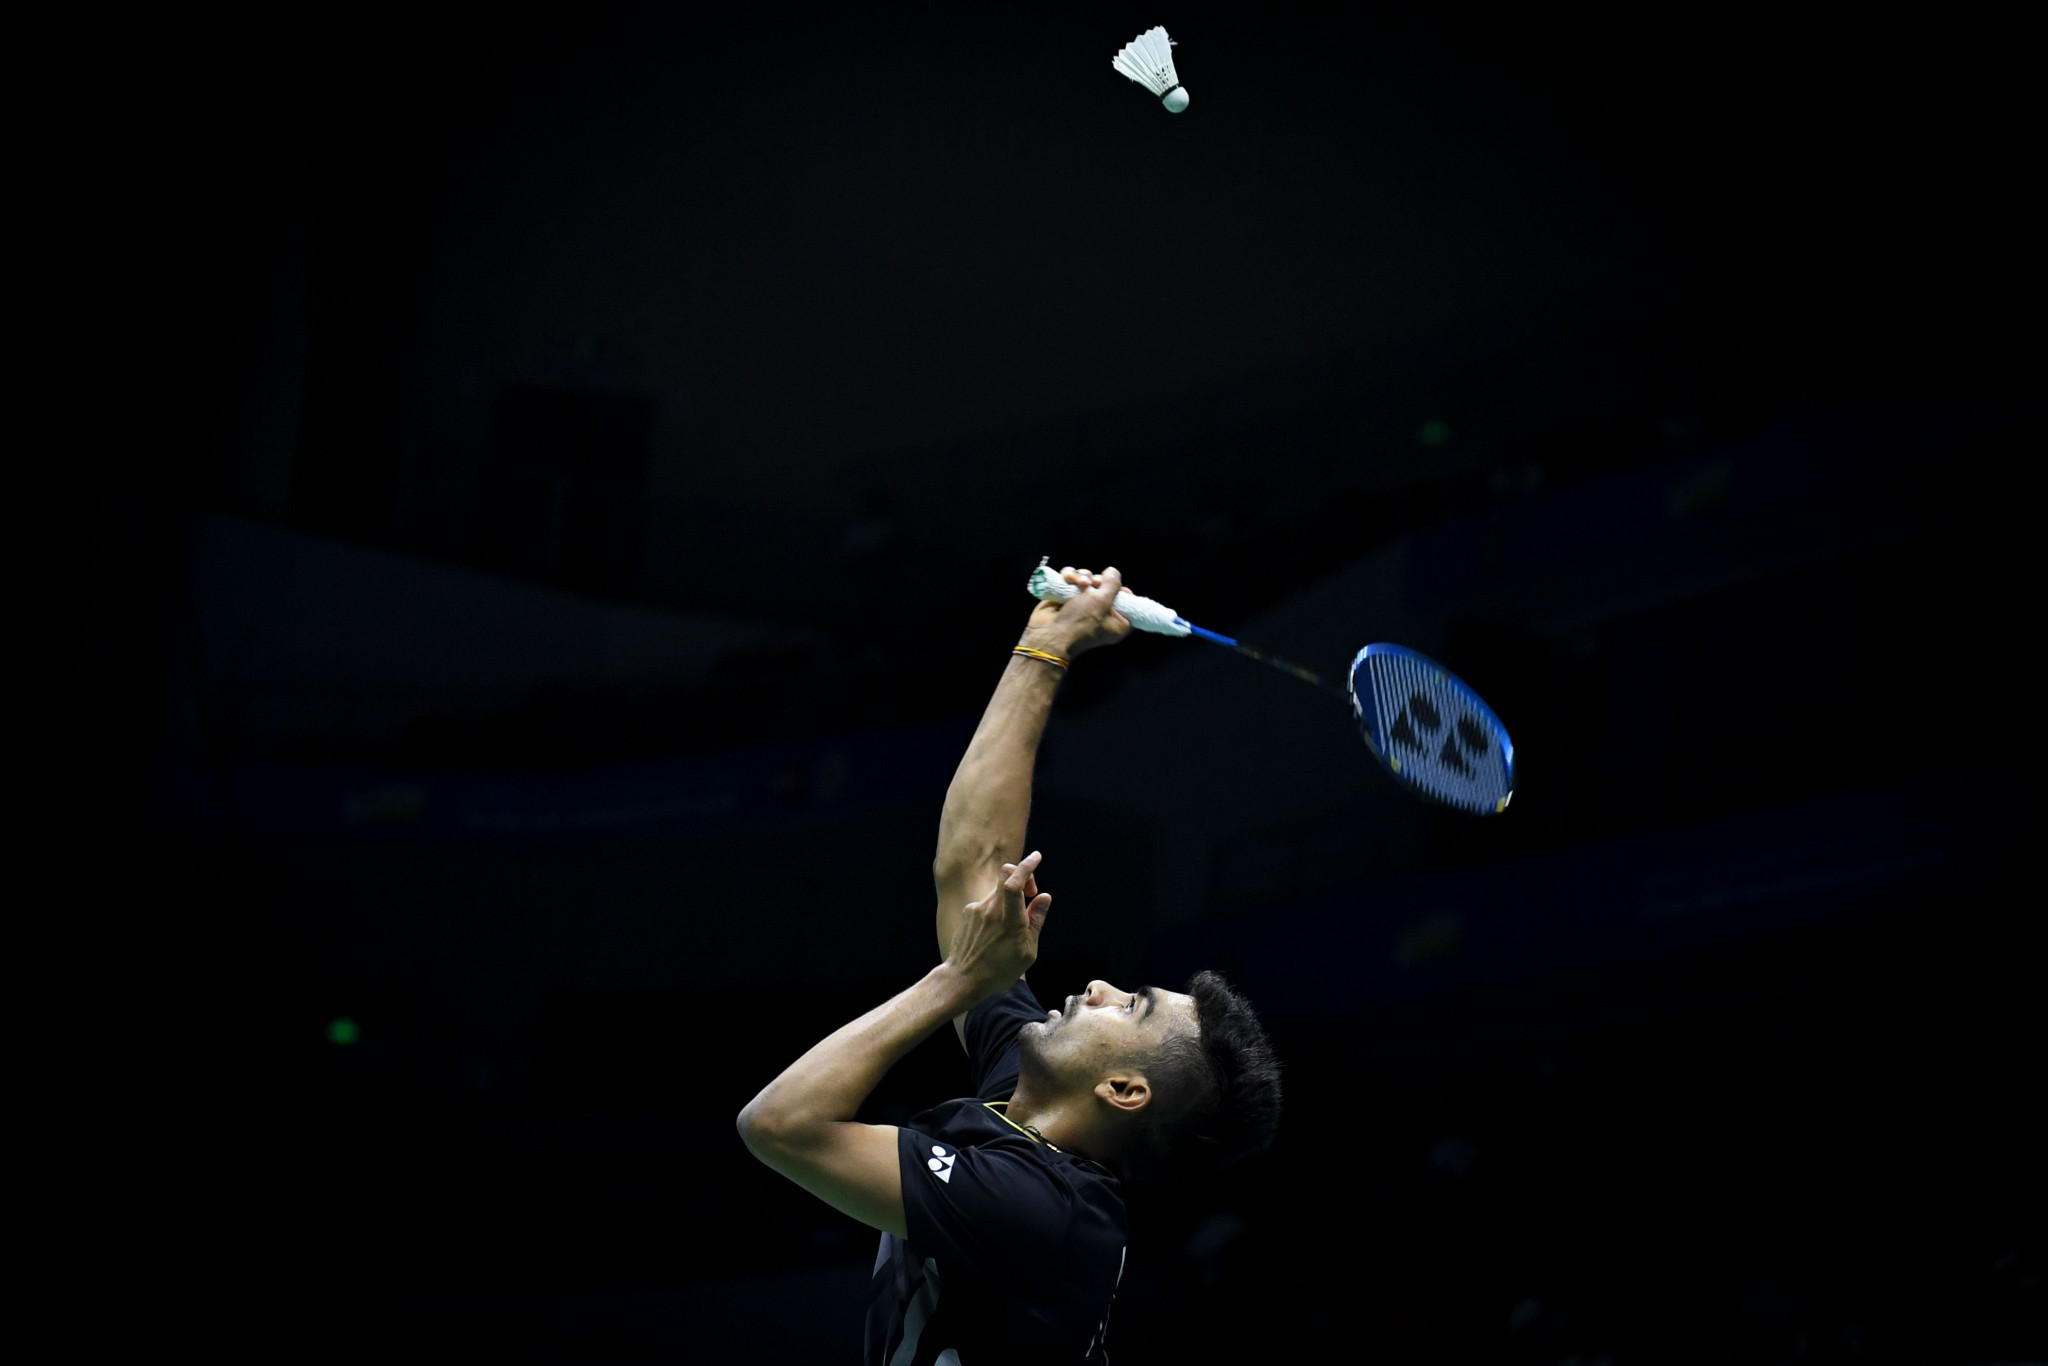 Sixth seed Sameer Verma has been knocked out of the men's singles event ©Getty Images